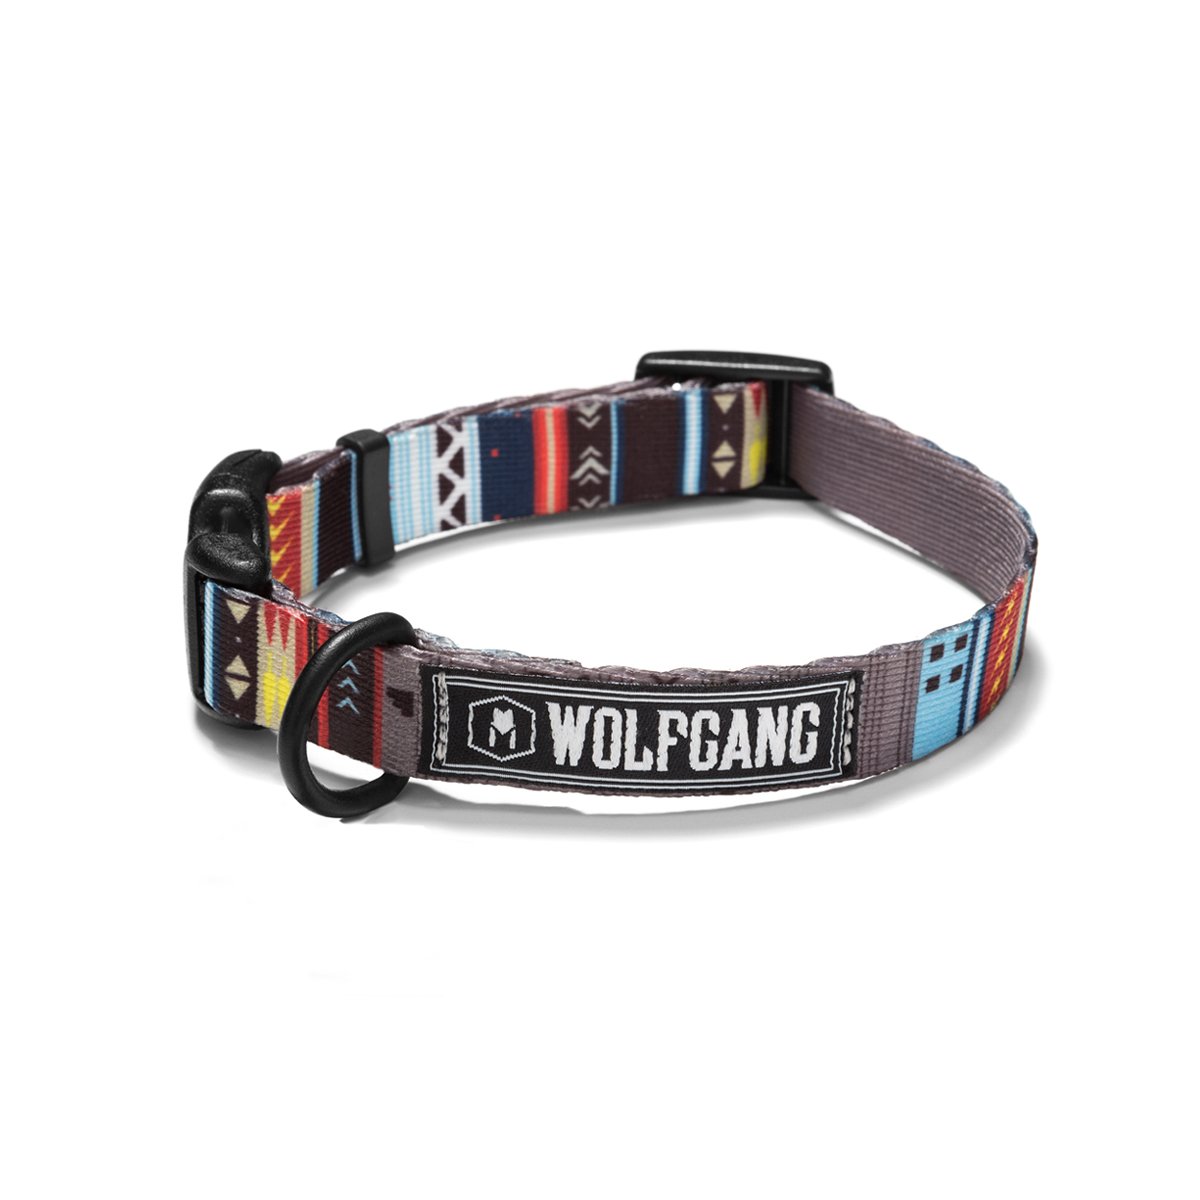 Wolfgang Dog Collar - Native Lines-5/8" Wide